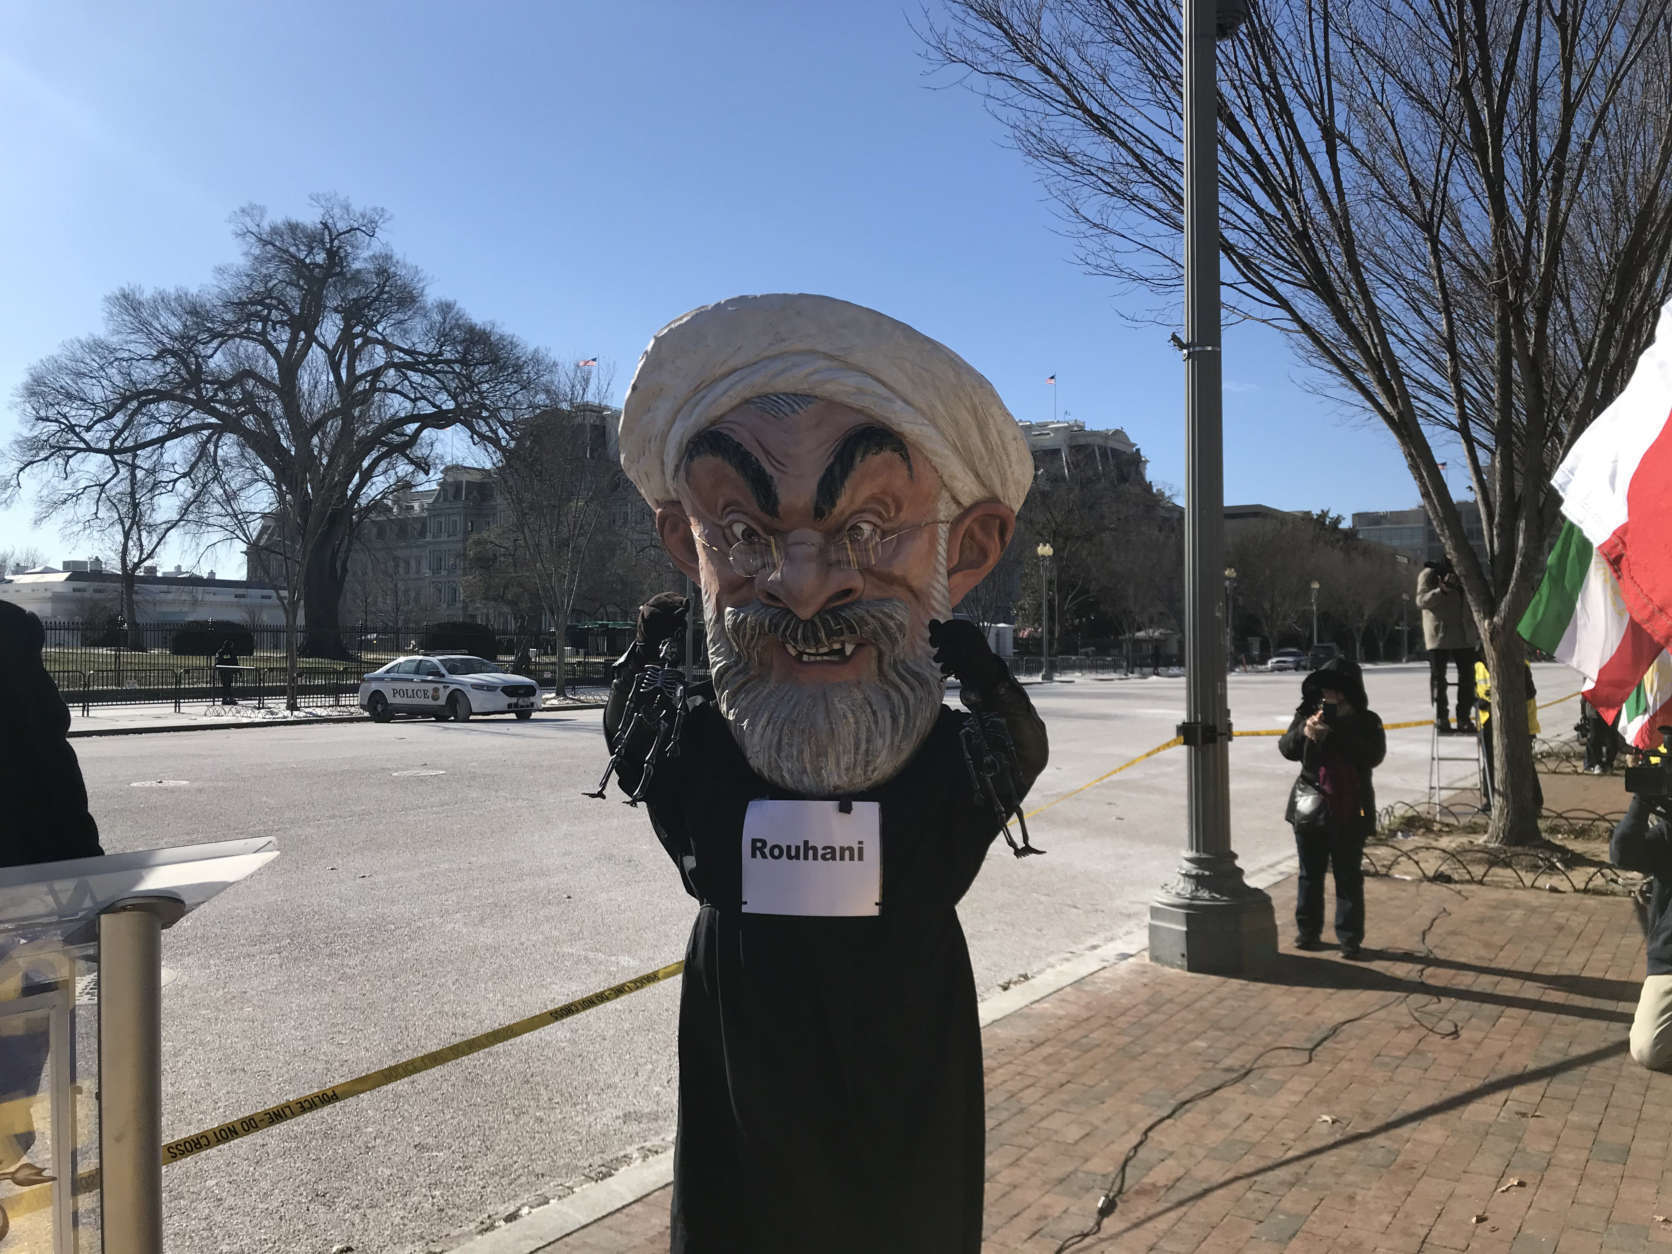 Despite sub-freezing temperatures, demonstrators, many with roots in Iran, gathered in front of the White House to show support for nationwide protests that have shaken Iran. (WTOP/Dick Uliano) 